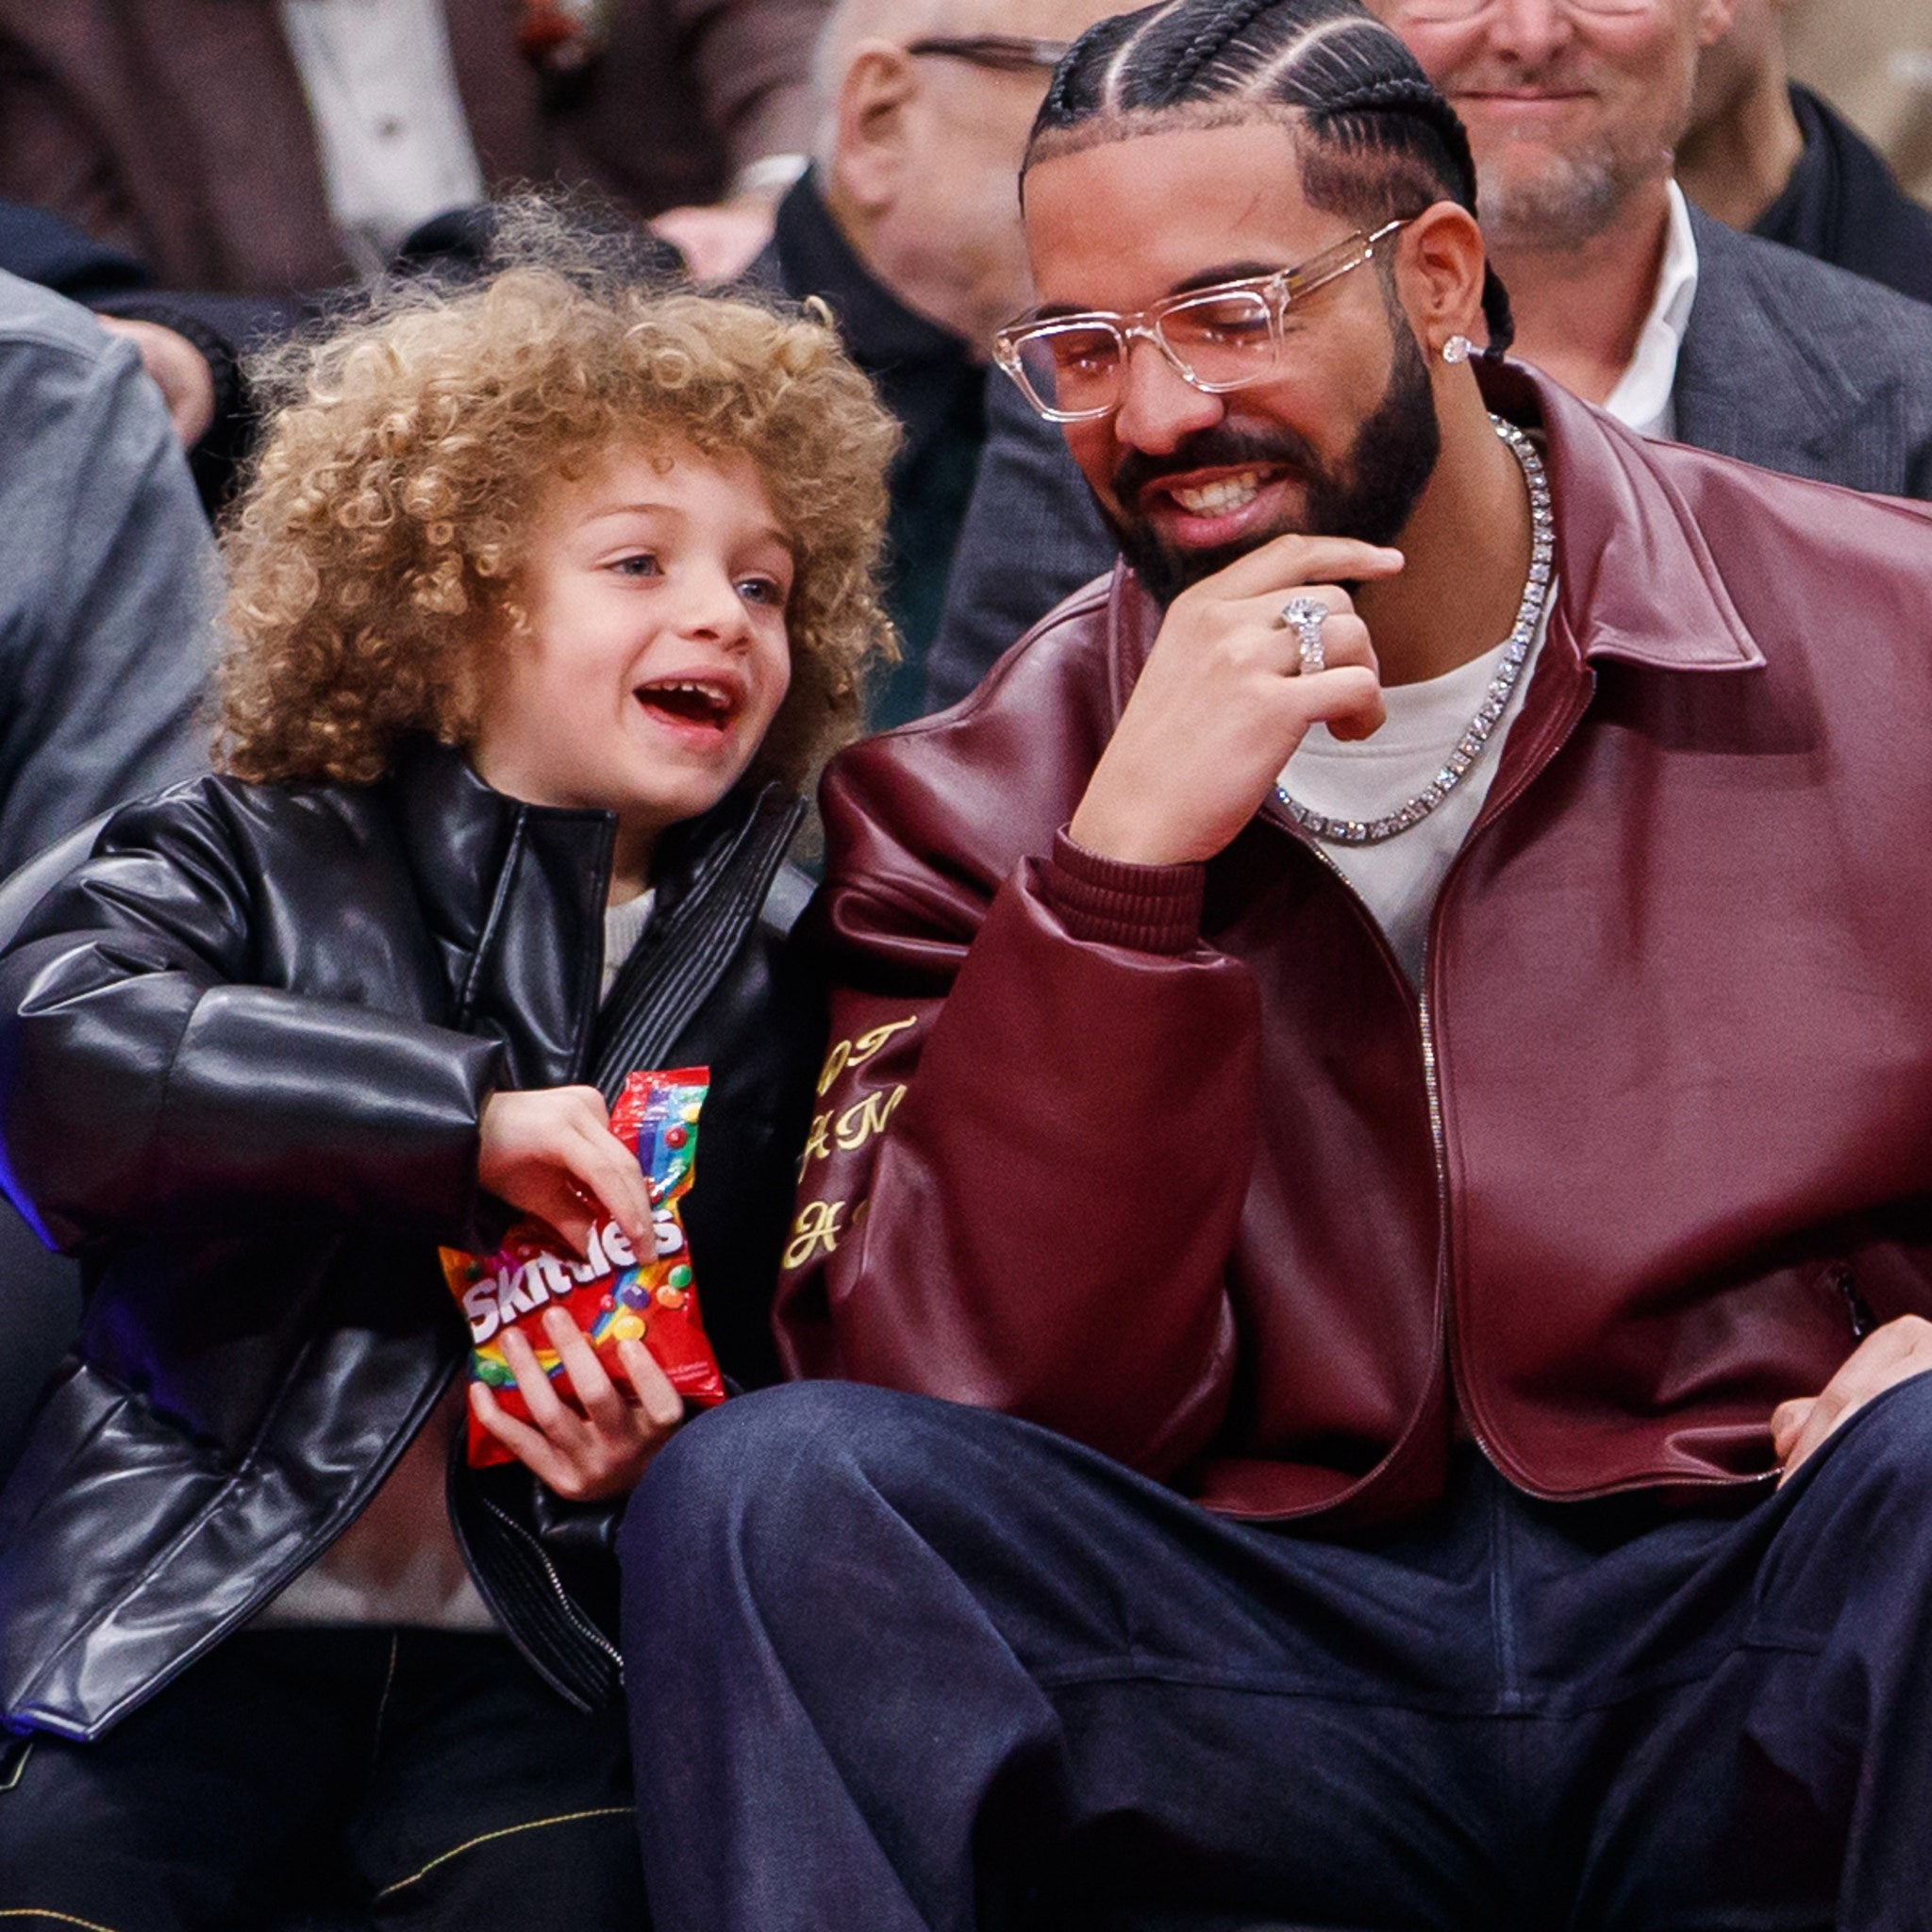 Drake's son Adonis makes his official music debut with 'My Man Freestyle